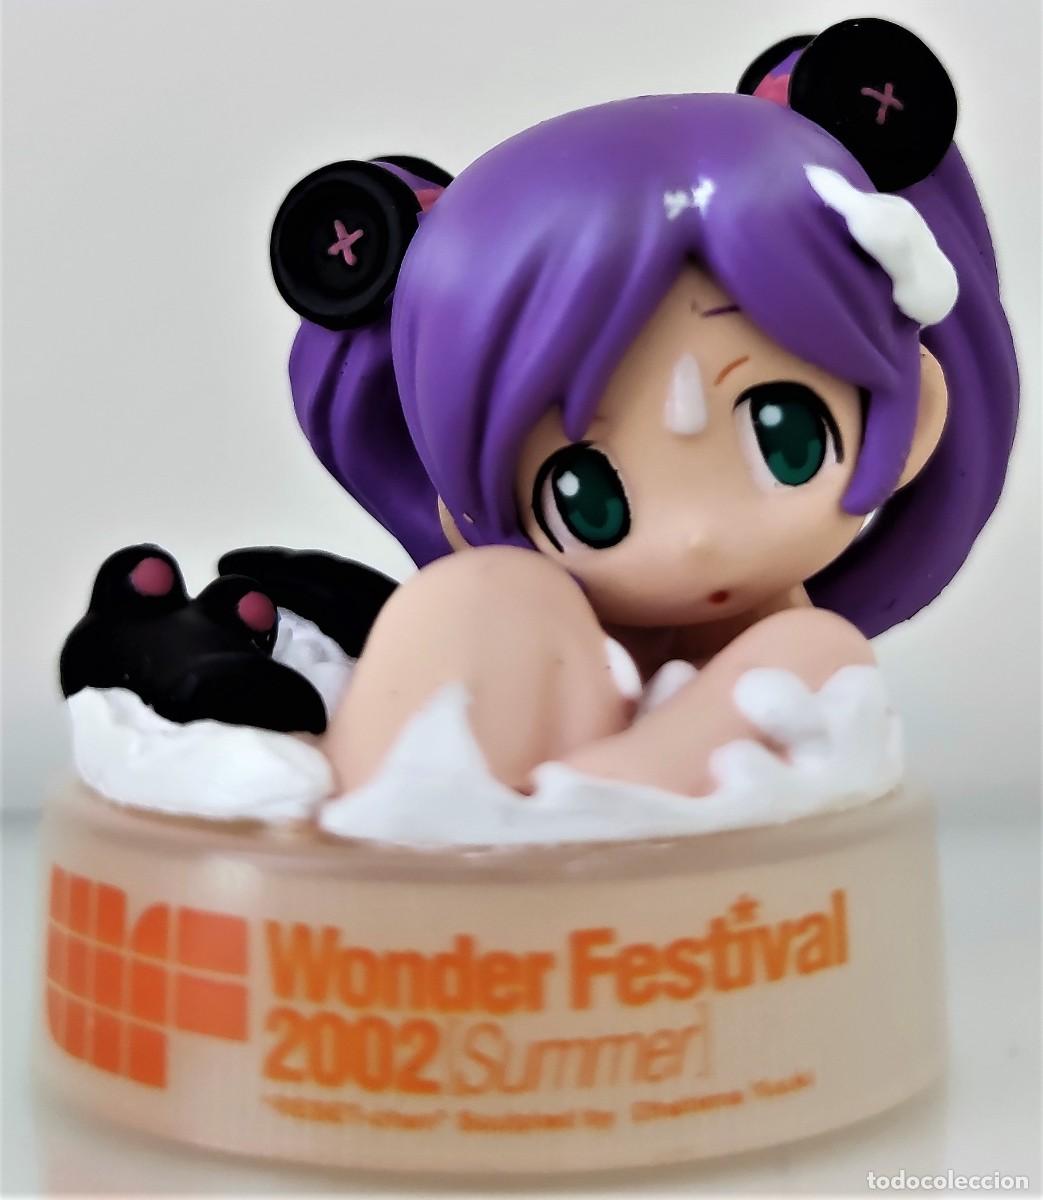 Wonder Festival 2020  2021  A Complete Guide on Tokyos Figure Expo